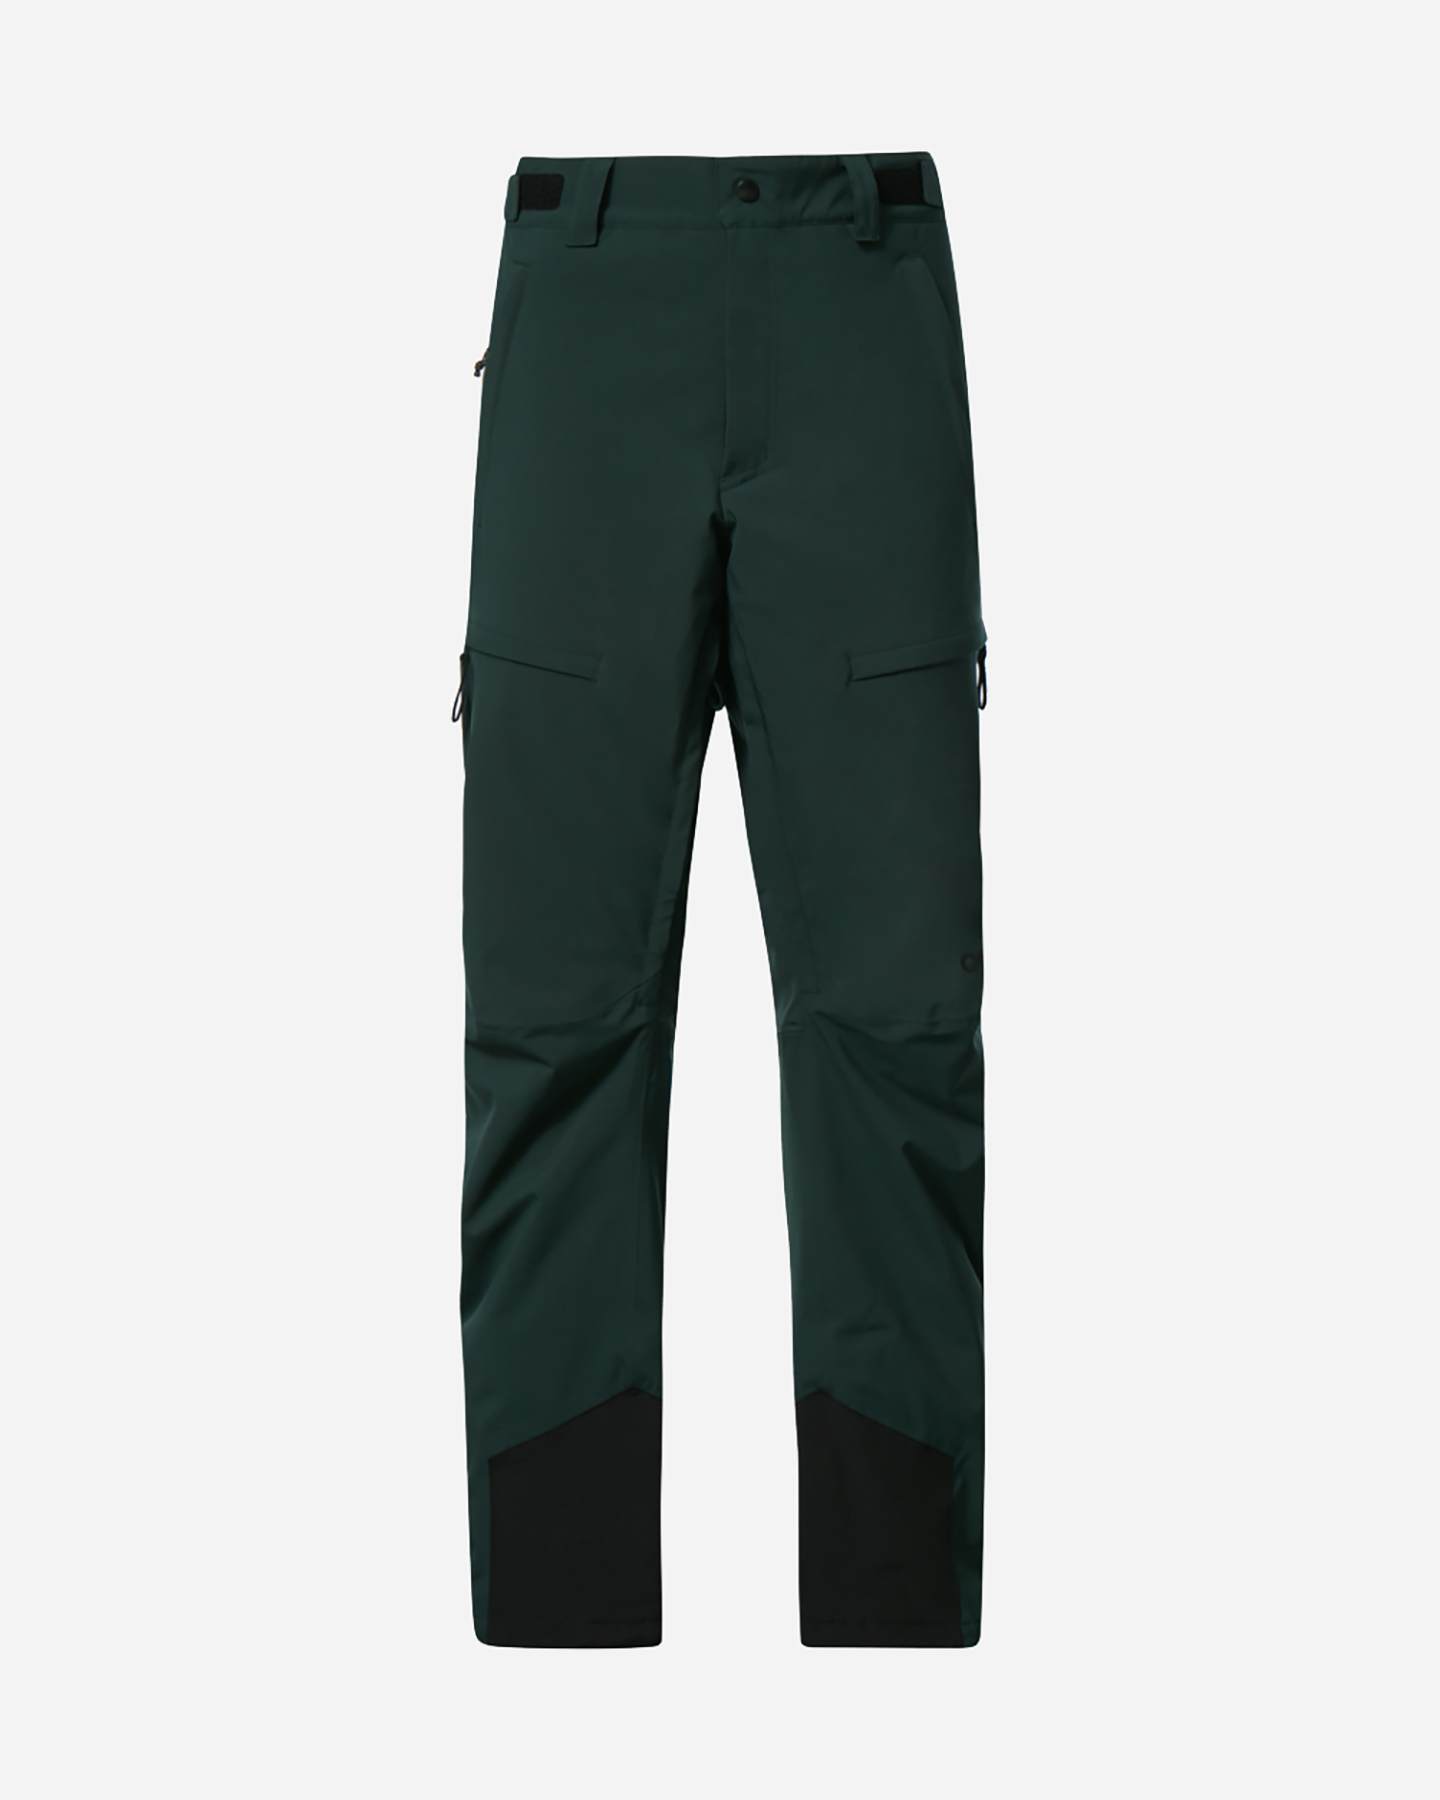 Image of Oakley Axis Blackout Insulated M - Pantaloni Sci - Uomo